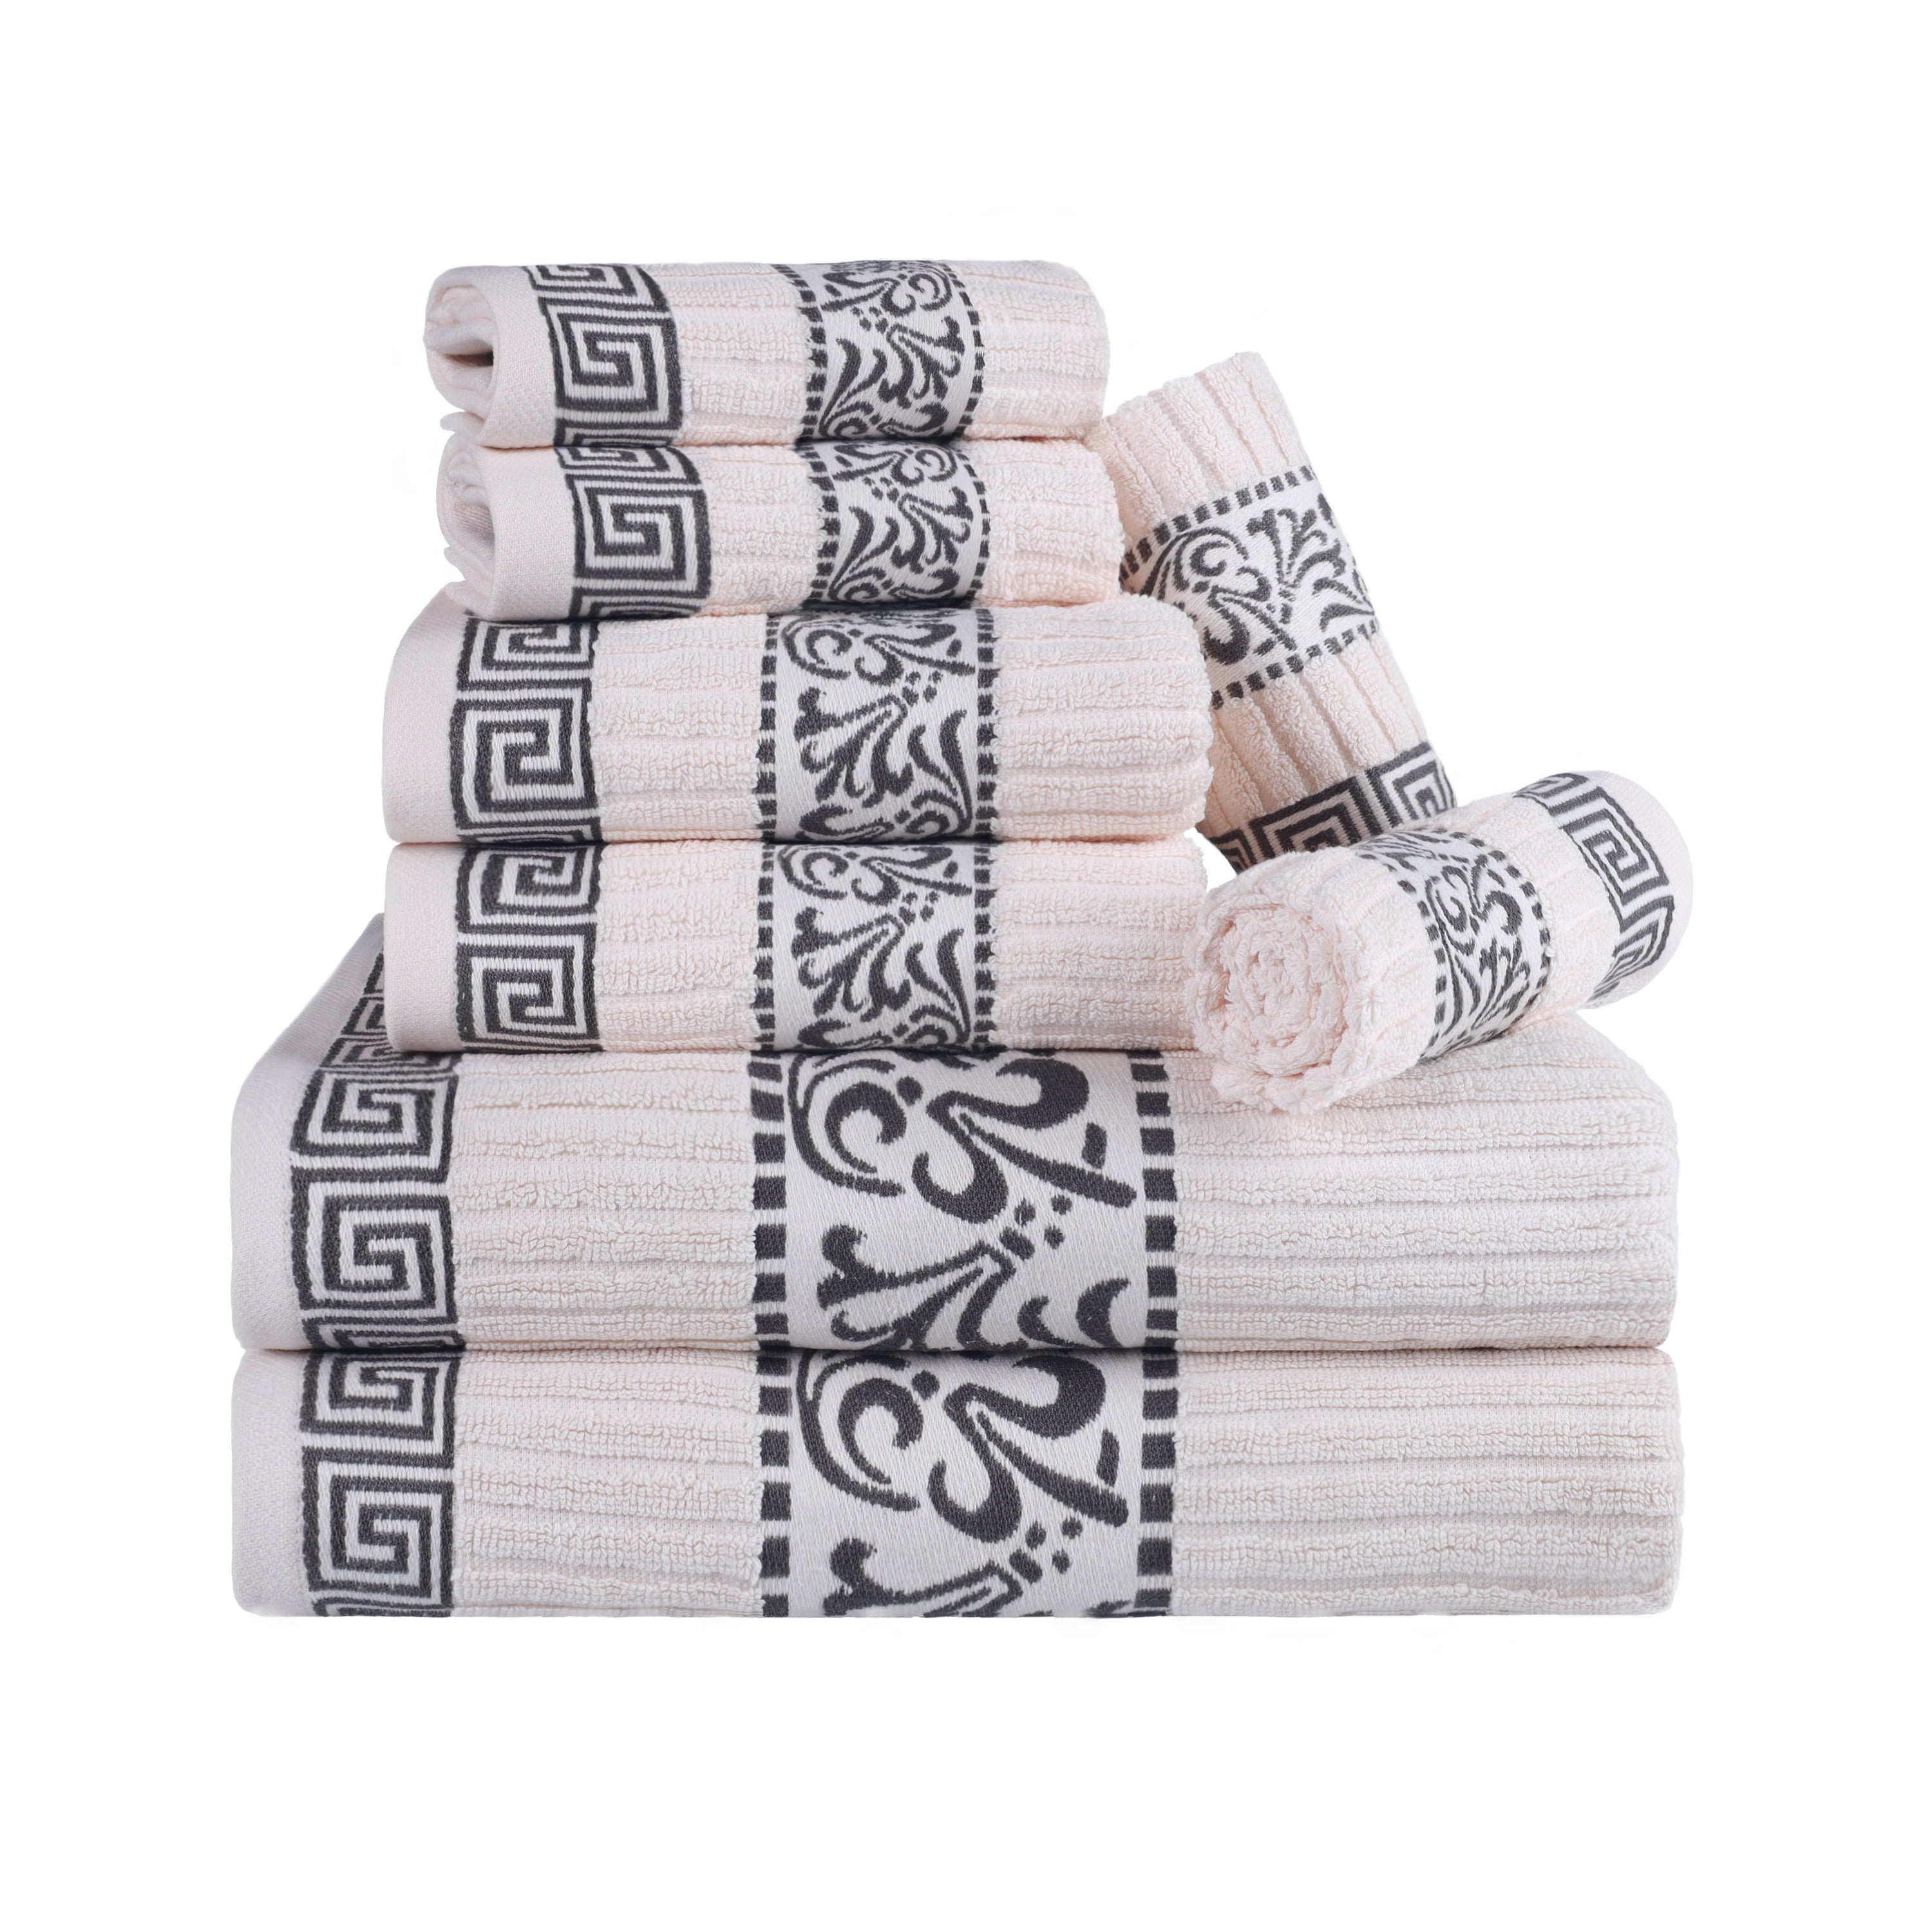 Lizling Luxury Bath Towels Set 3 Pack, Towel Set 100% Cotton (1 Large Bath  Towel, 1 Hand Towel, 1 Washcloth) Ultra Soft and Highly Absorbent, for